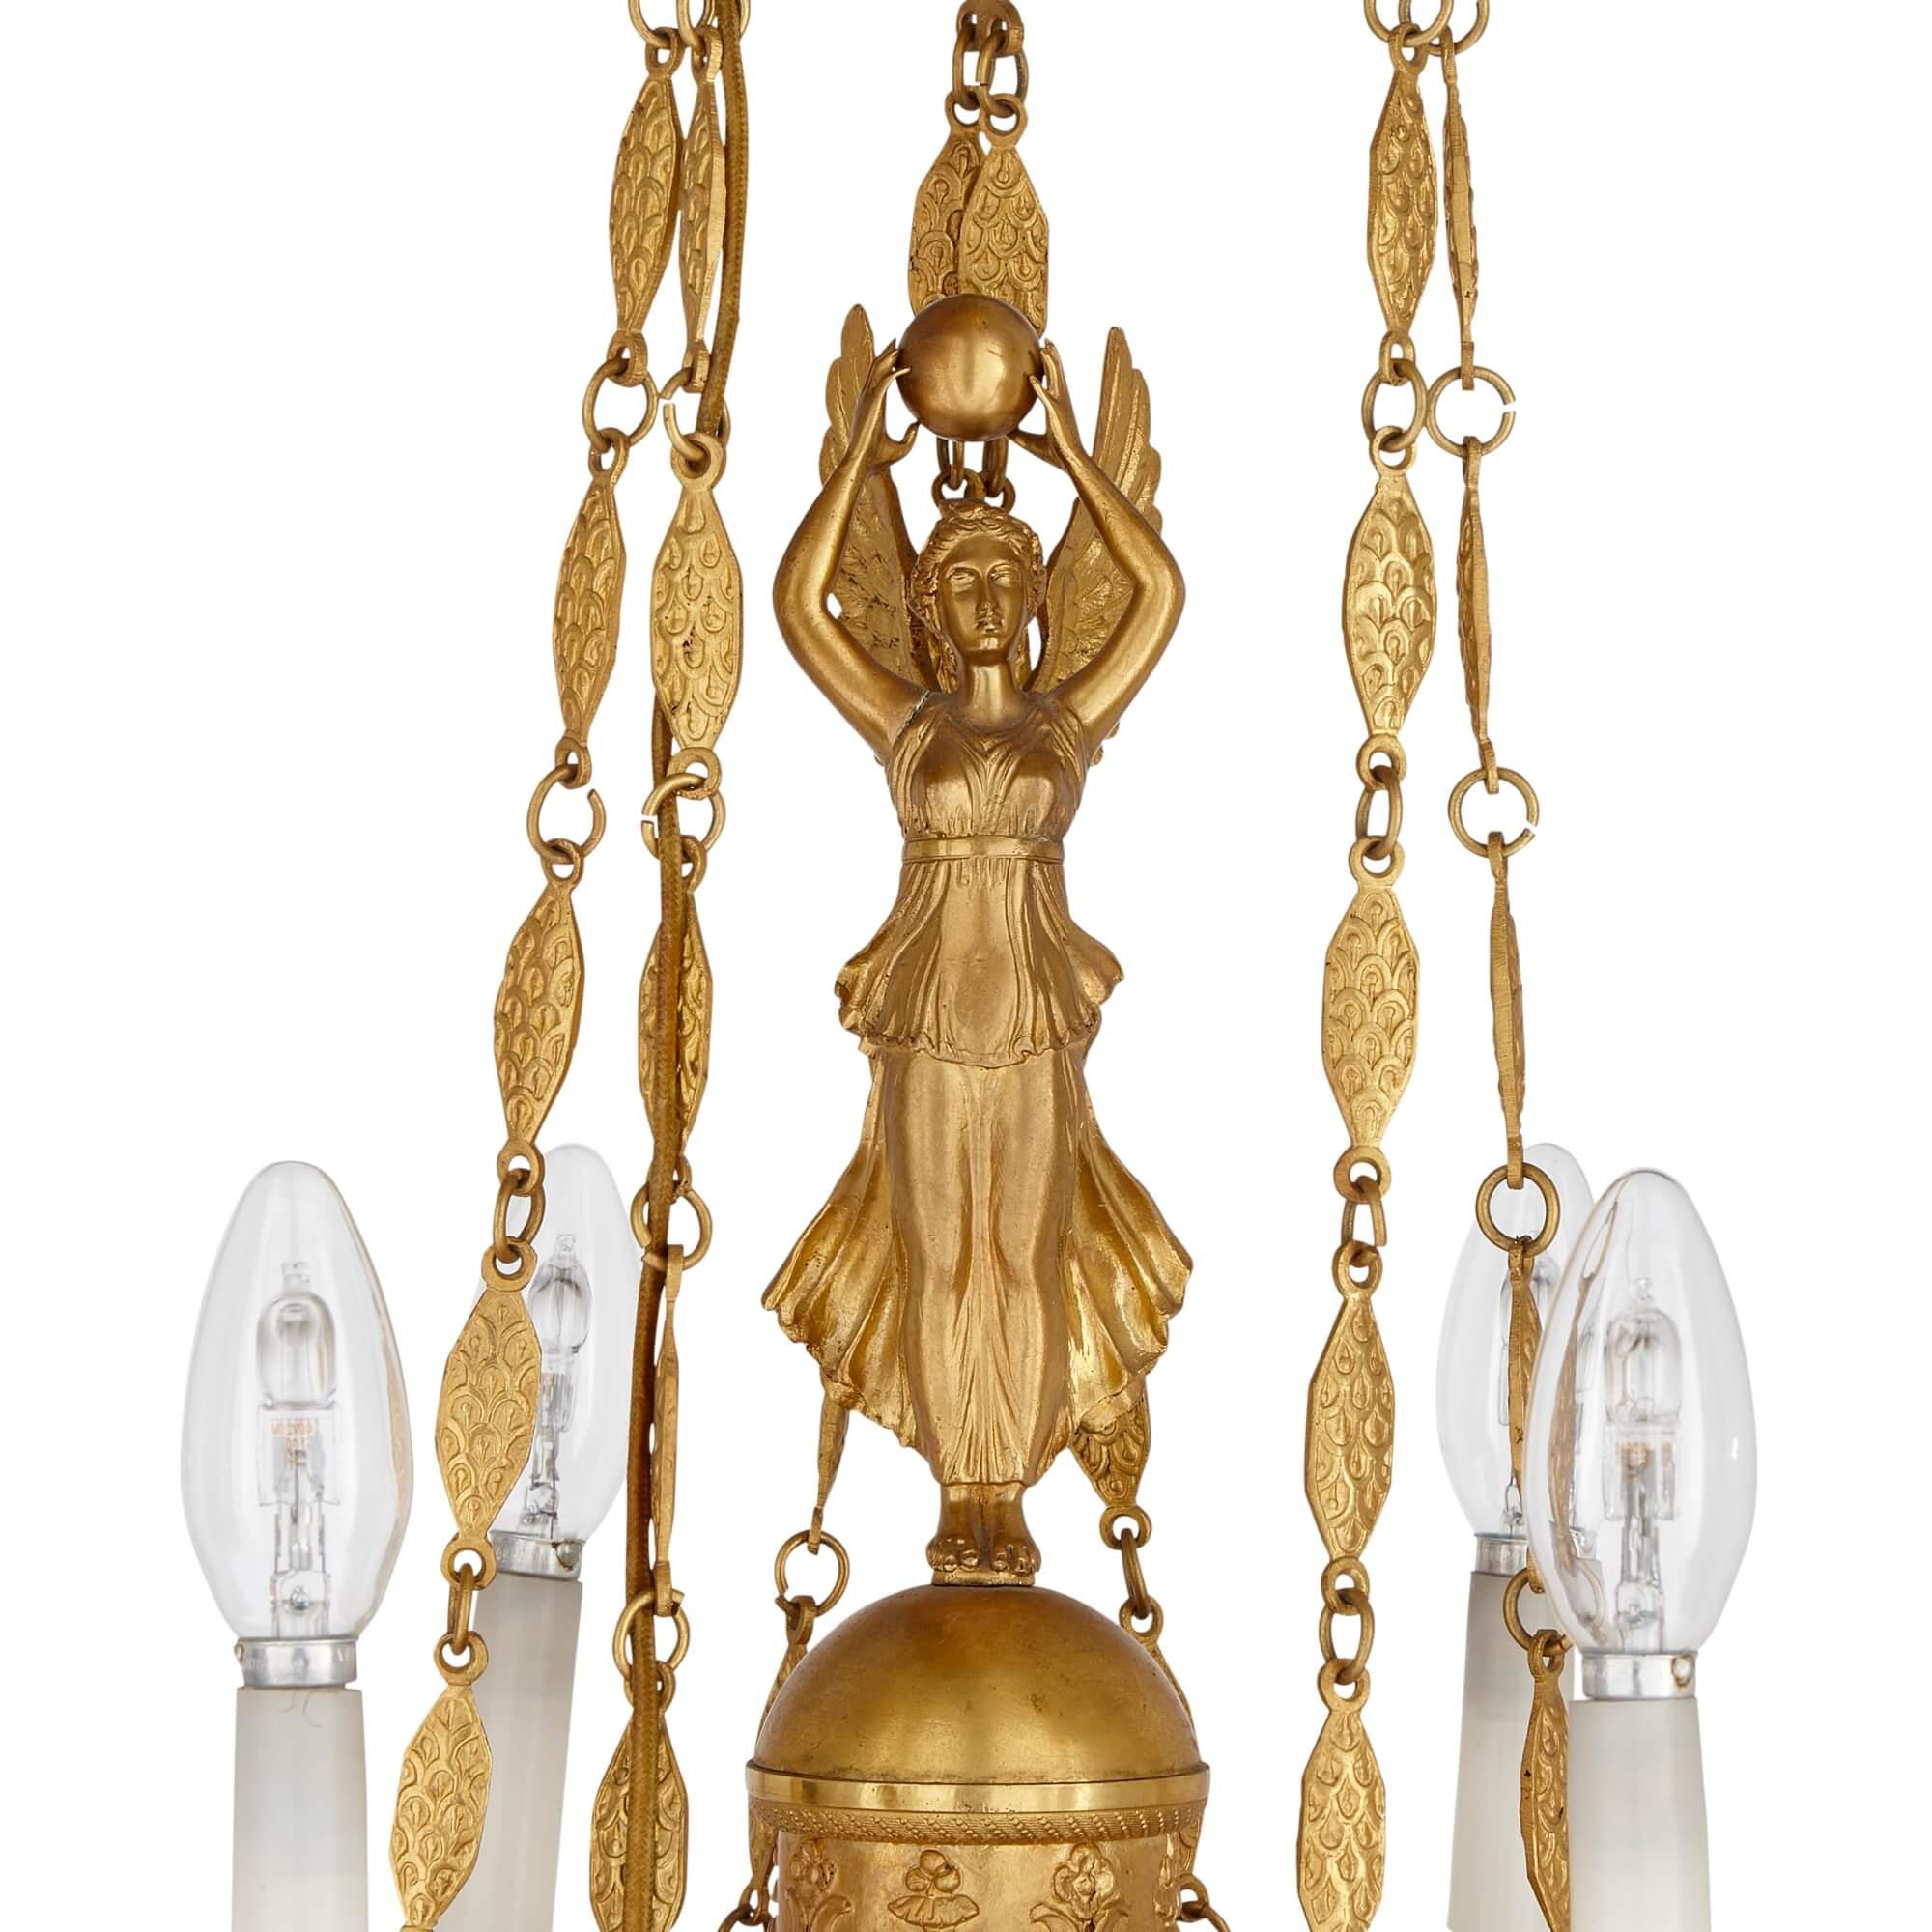 Empire period French gilt bronze six light chandelier
French, c. 1810
Height 80cm, diameter 45cm

Made in France around 1810, at the time when the Empire style was in vogue, the chandelier’s design encapsulates many of the features characterising